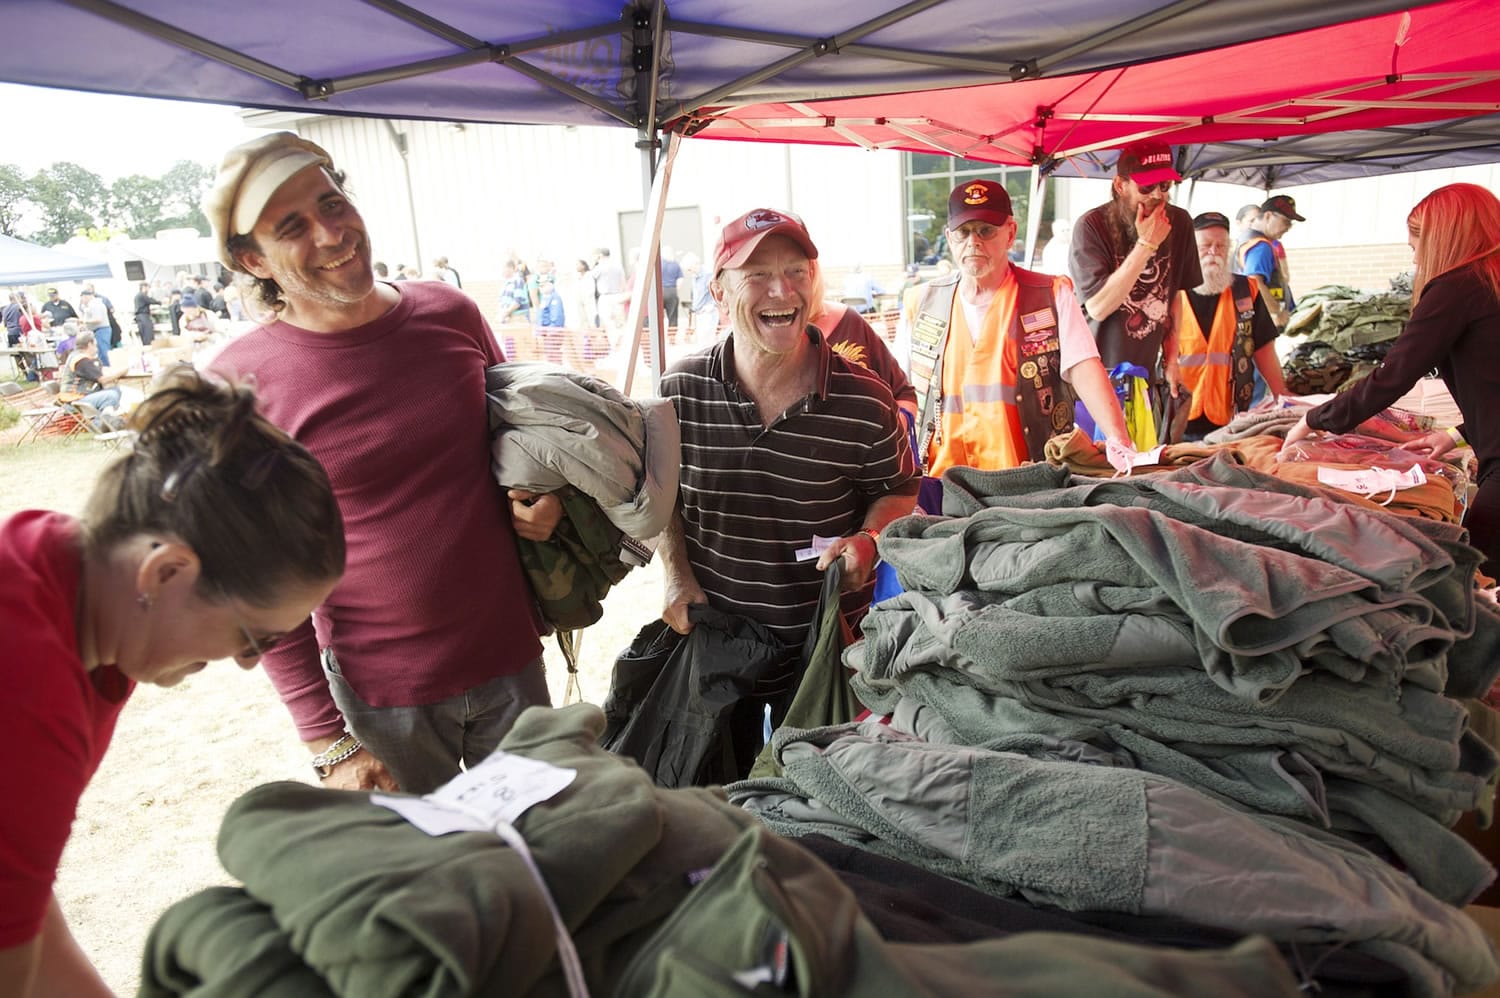 Photos by Steven Lane/The Columbian
U.S. Army veteran Paul Rodriguez-Navarro, left, and Navy veteran Dave Sommer pick up military surplus items Wednesday at the annual Veterans Stand-Down event at the Armed Forces Reserve Center.